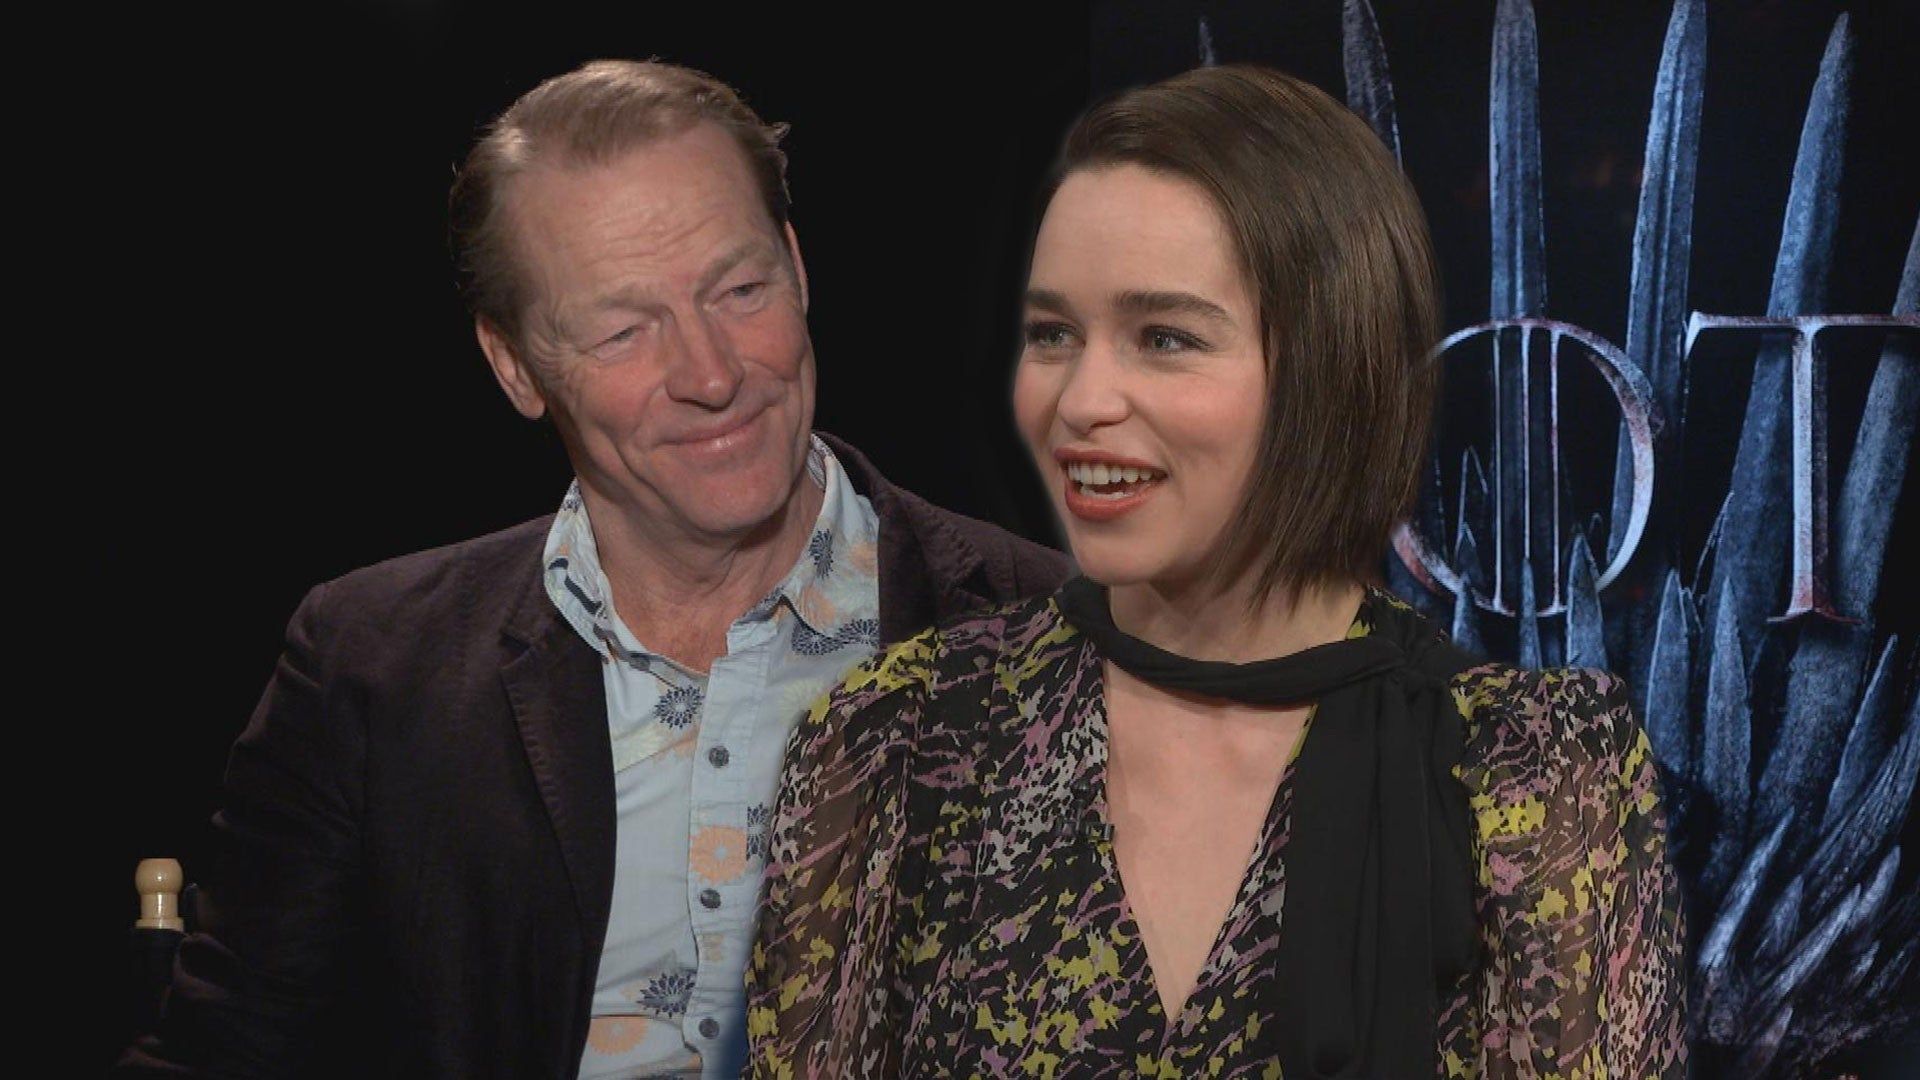 Game Of Thrones' Star Iain Glen Says Co Star Emilia Clarke 'Wentl' With Aneurysms (Exclusive)